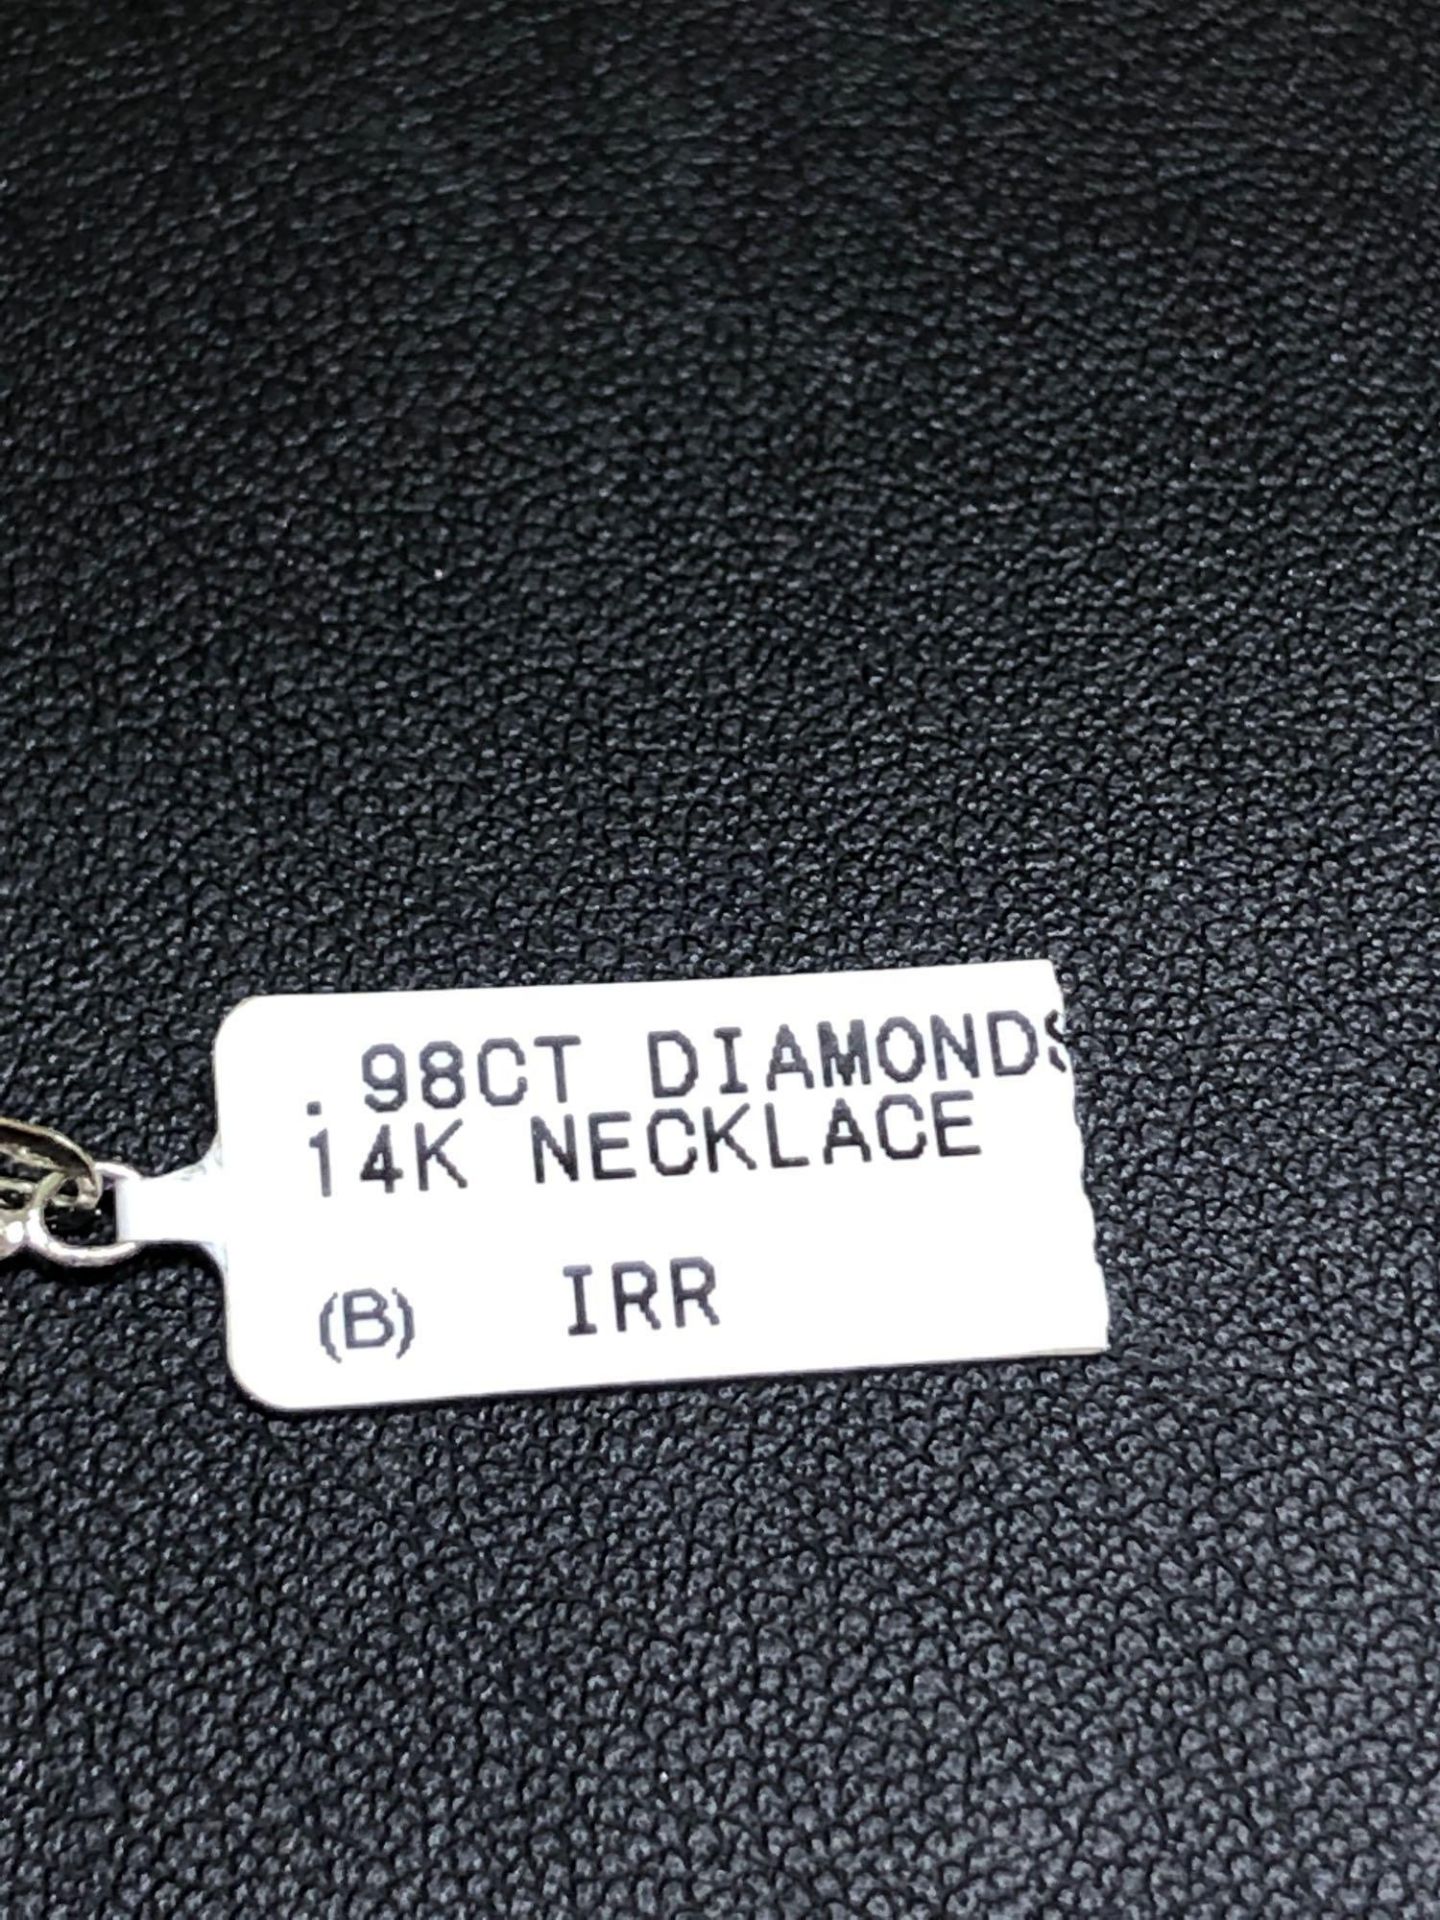 .98CT DIAMOND NECKLACE 14KT WHITE GOLD - Image 3 of 4